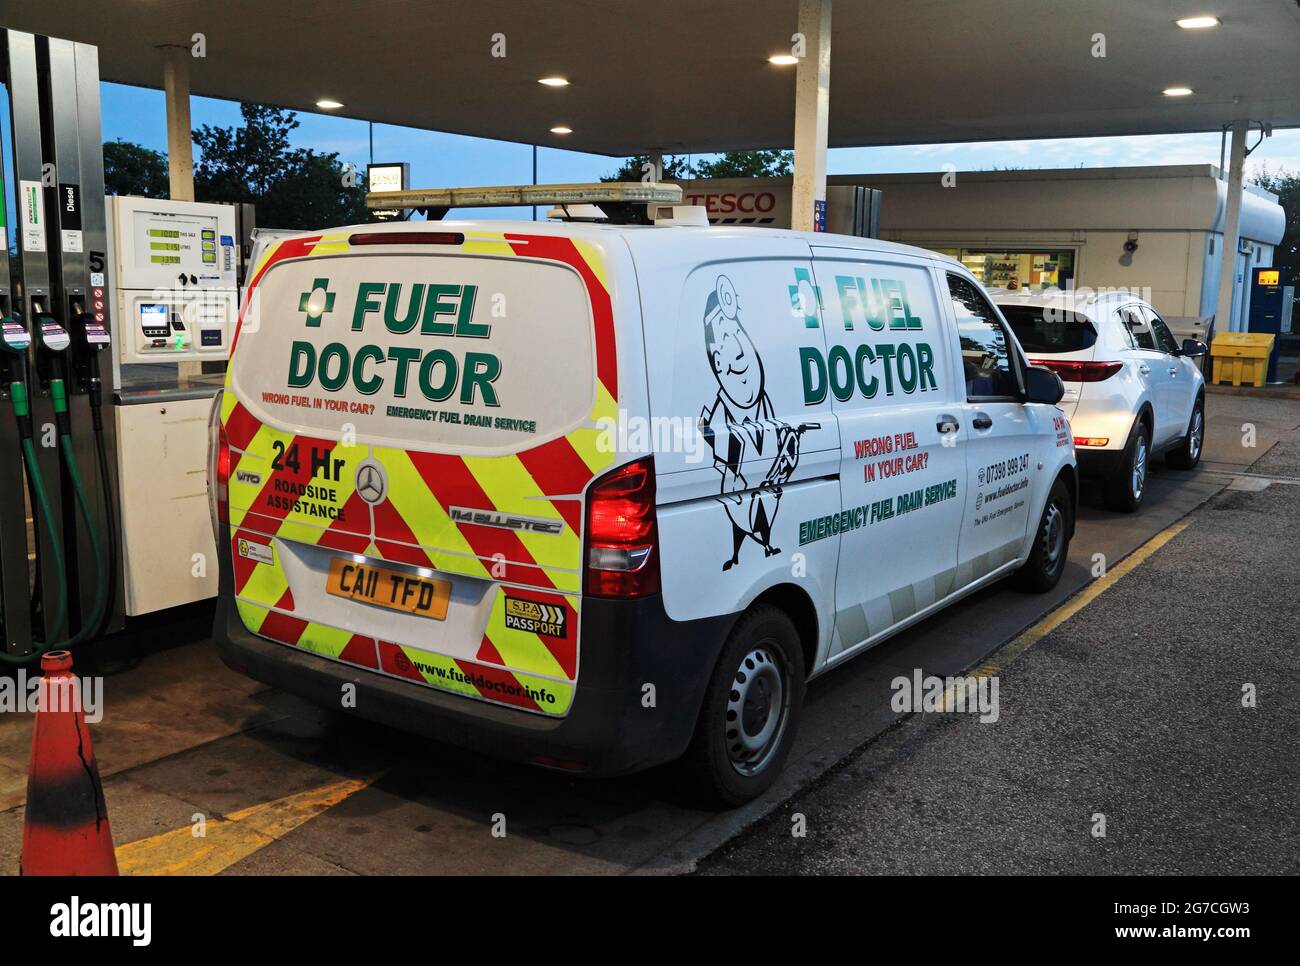 Fuel Doctor, vehicle, emergency fuel drain, service, filling station, England, UK Stock Photo